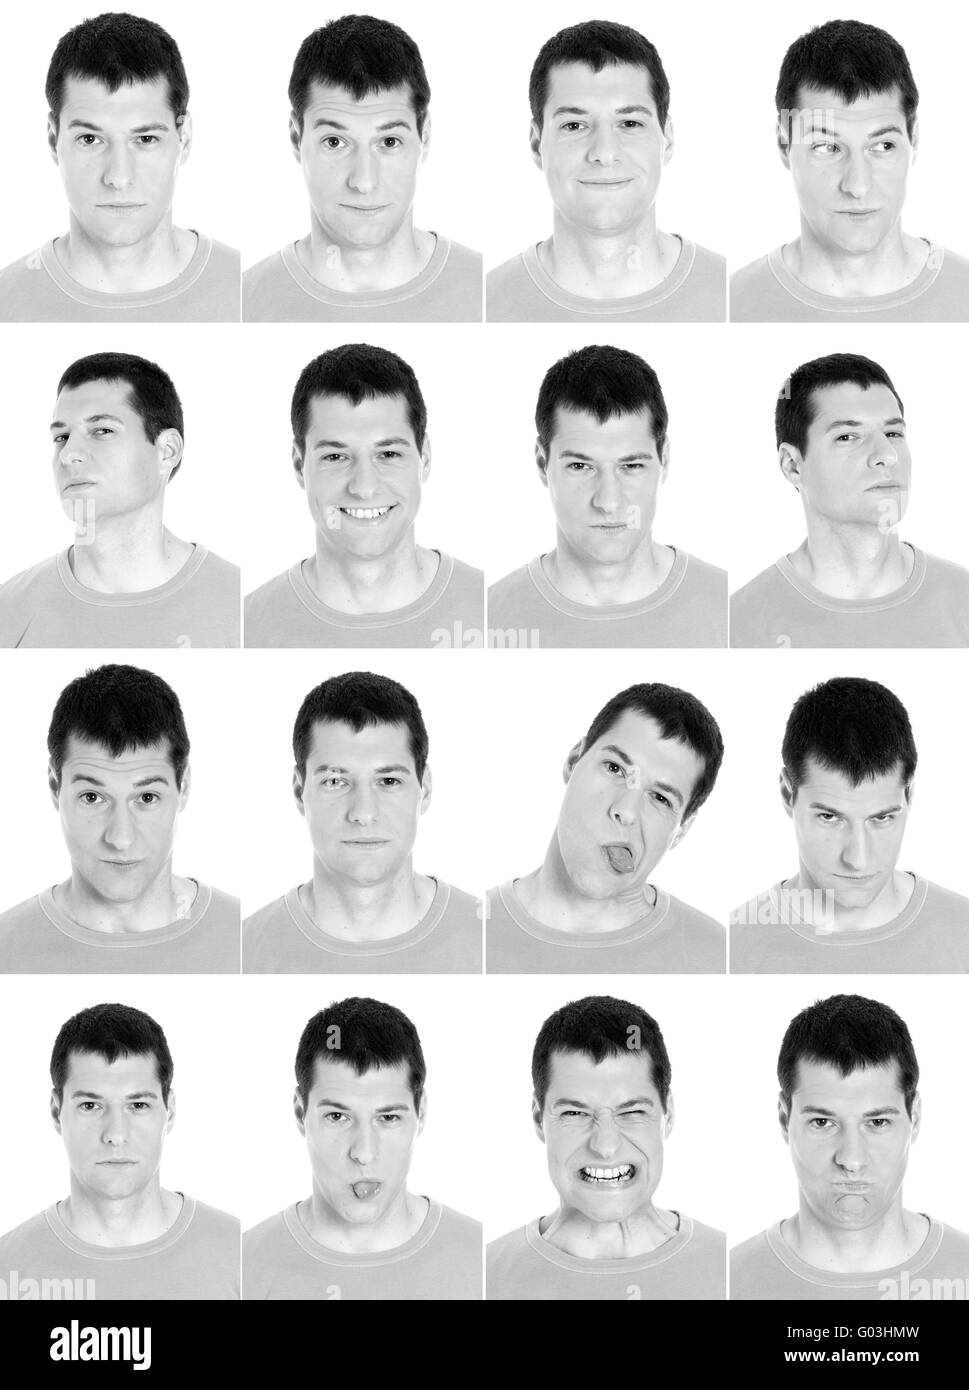 Adult man face expressions composite composite black and white. Stock Photo